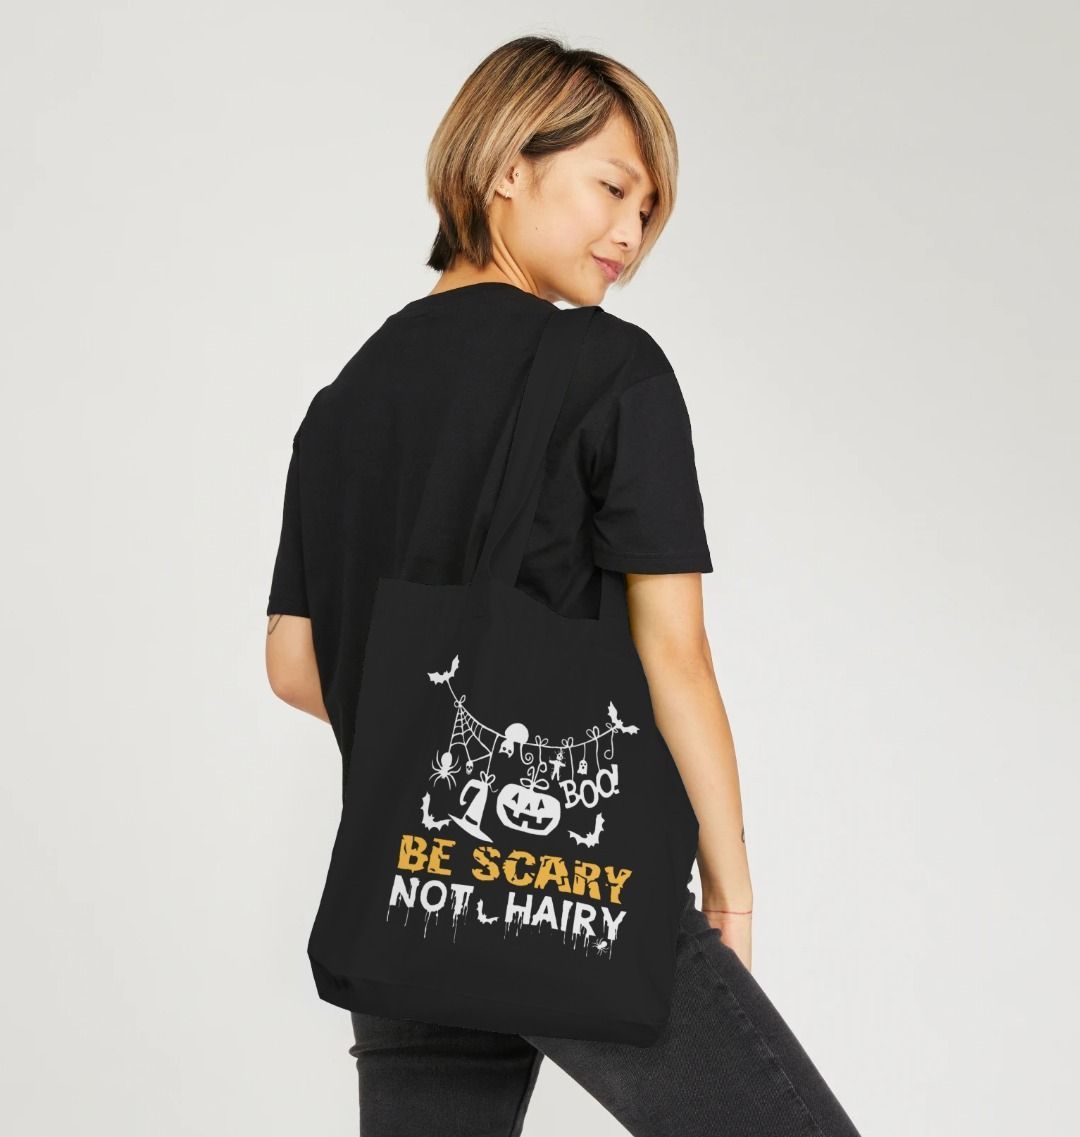 BE SCARY NOT HAIRY BAG